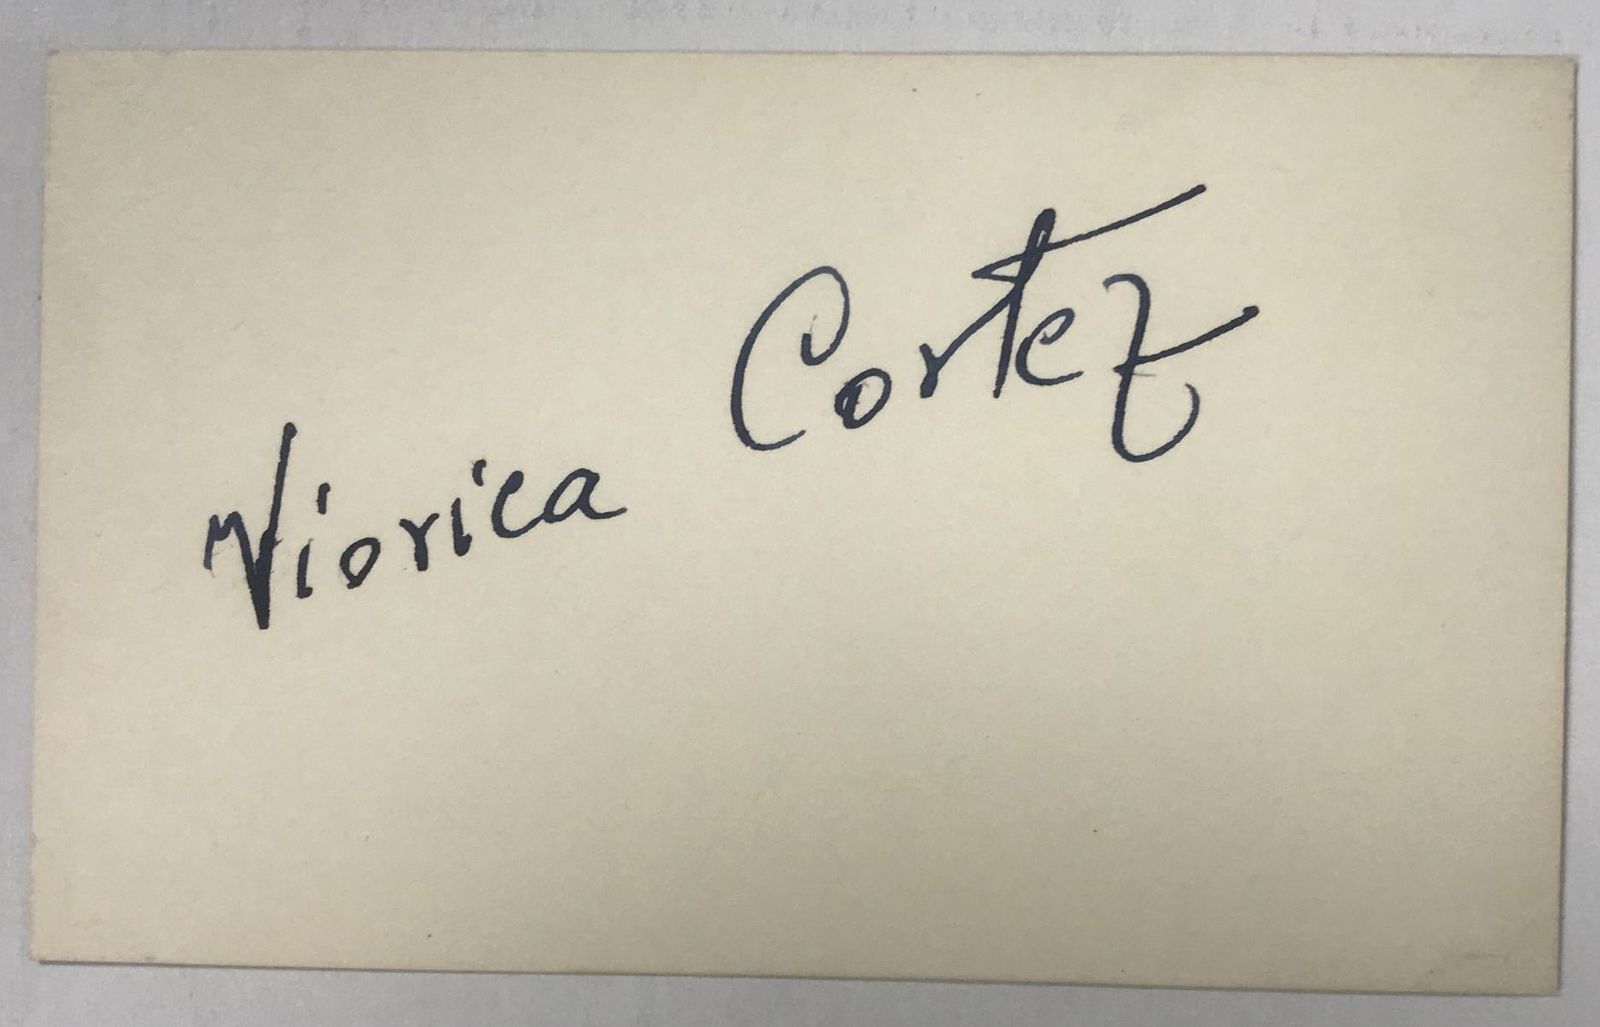 Primary image for Viorica Cortez Signed Autographed Vintage 3x5 Index Card - Opera Legend